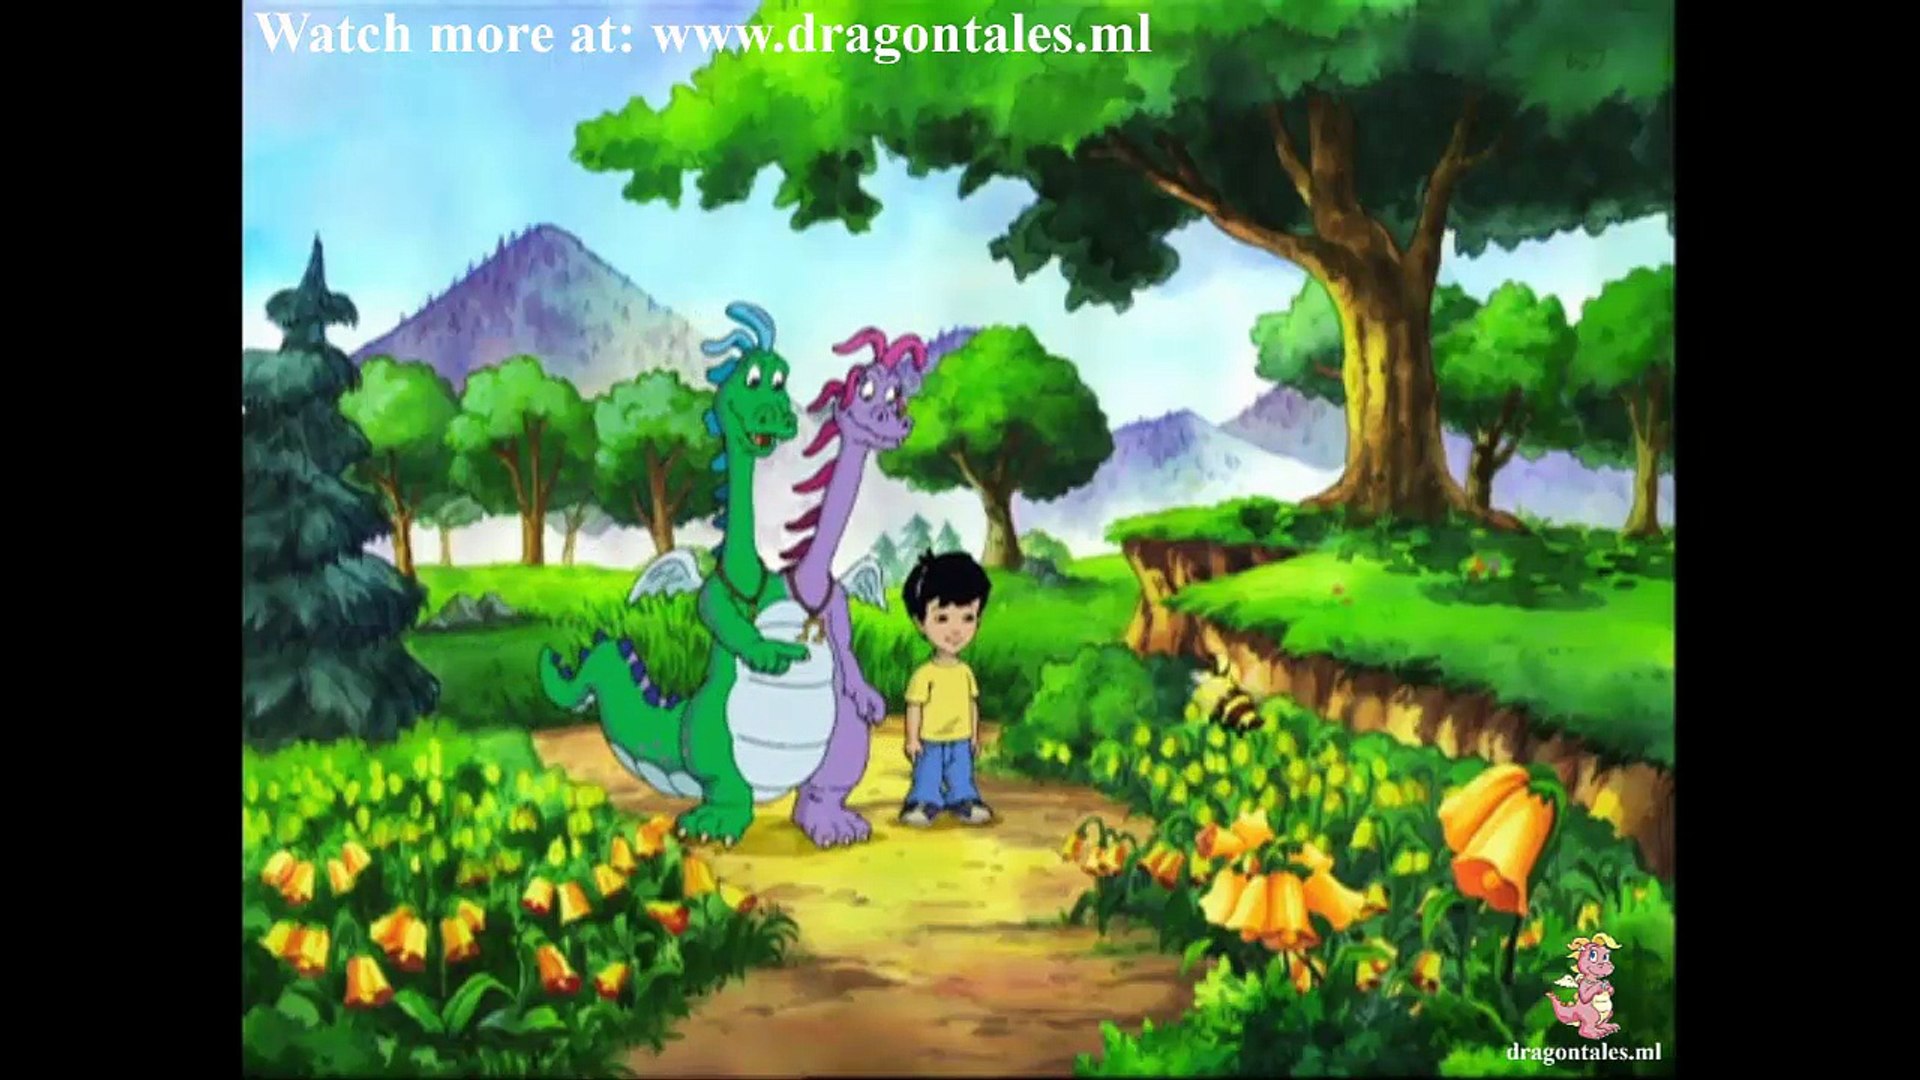 Dragon tales itching for a cure